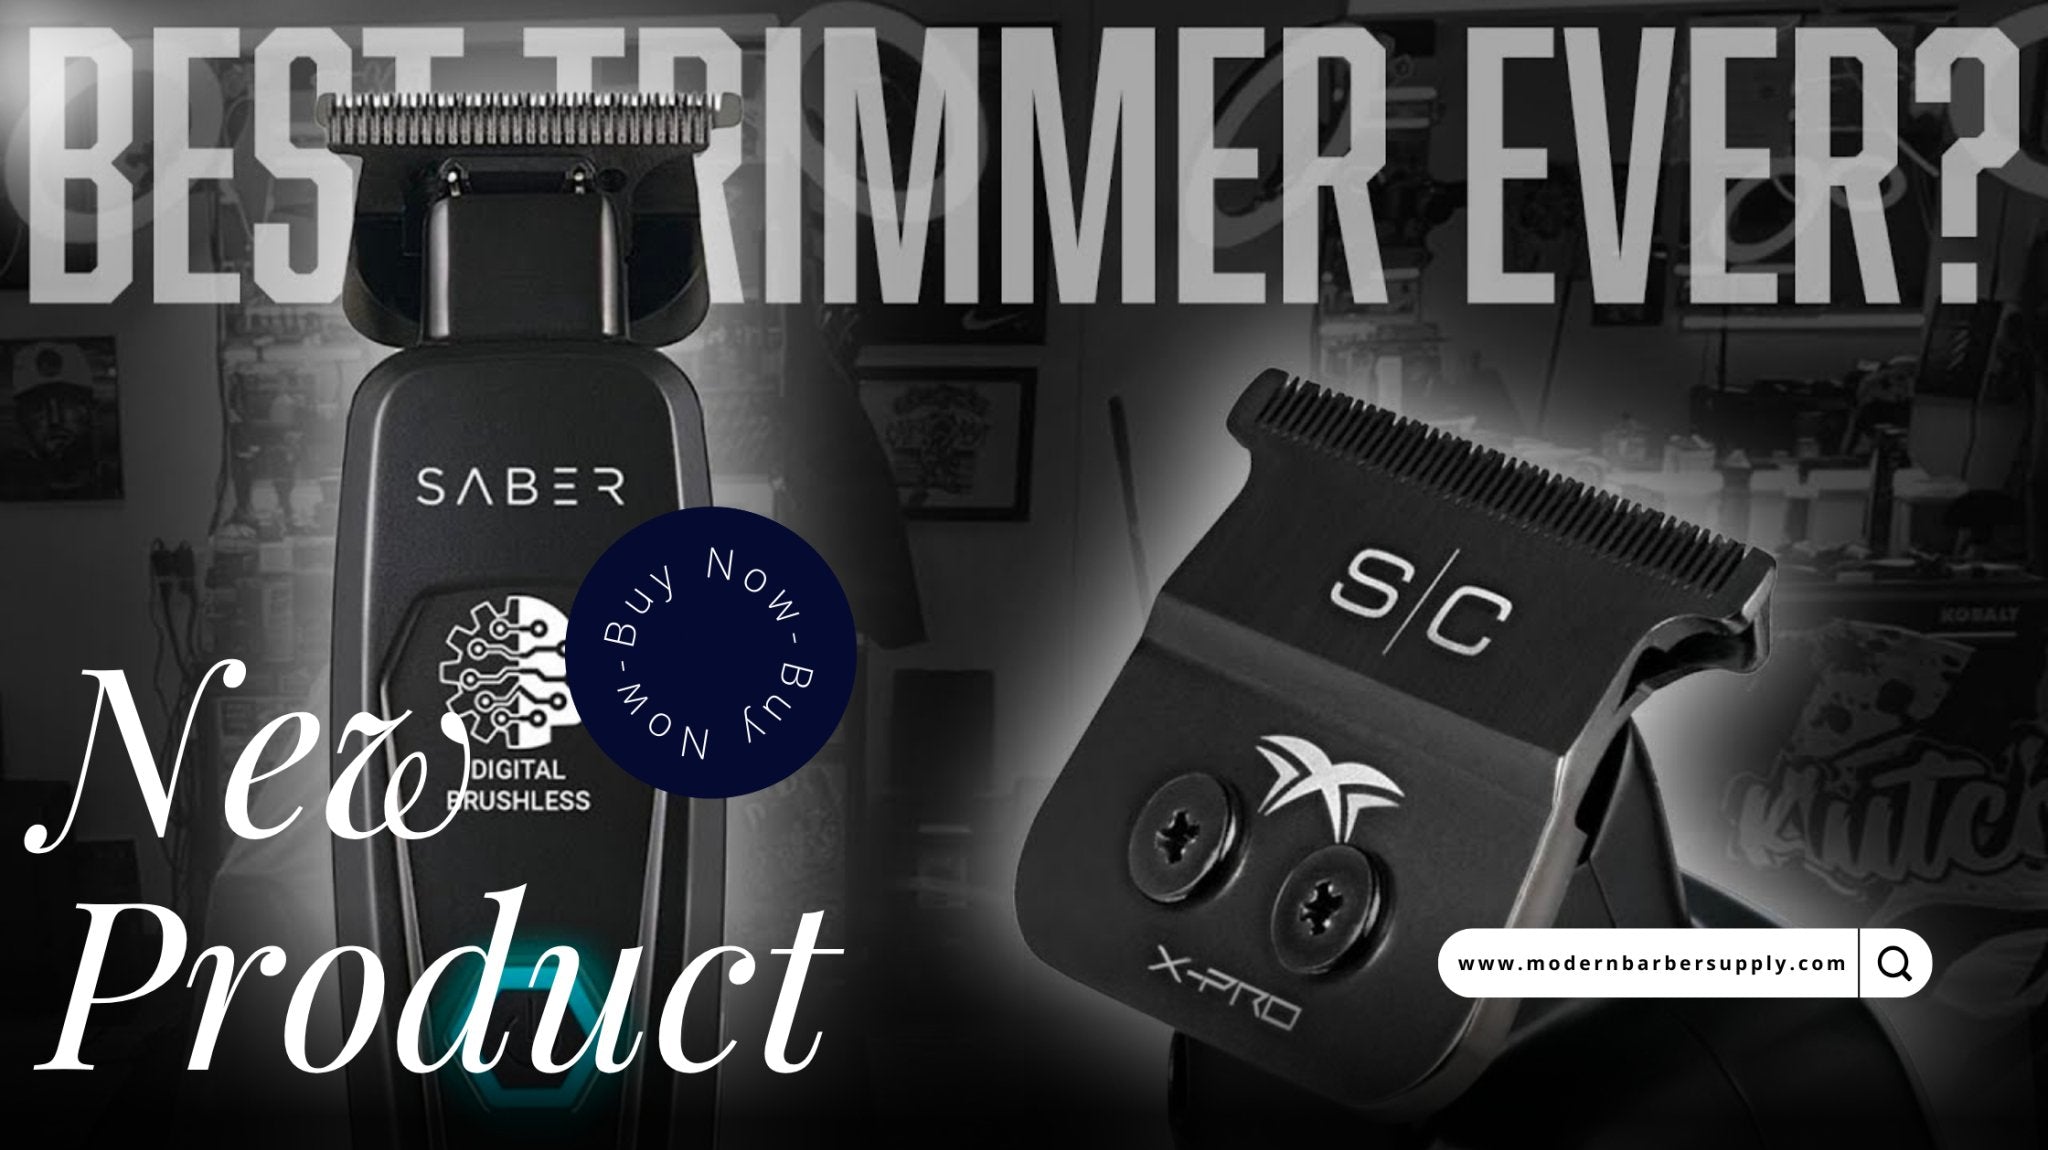 Revolutionize your grooming game with the Saber Trimmer - Modern Barber Supply